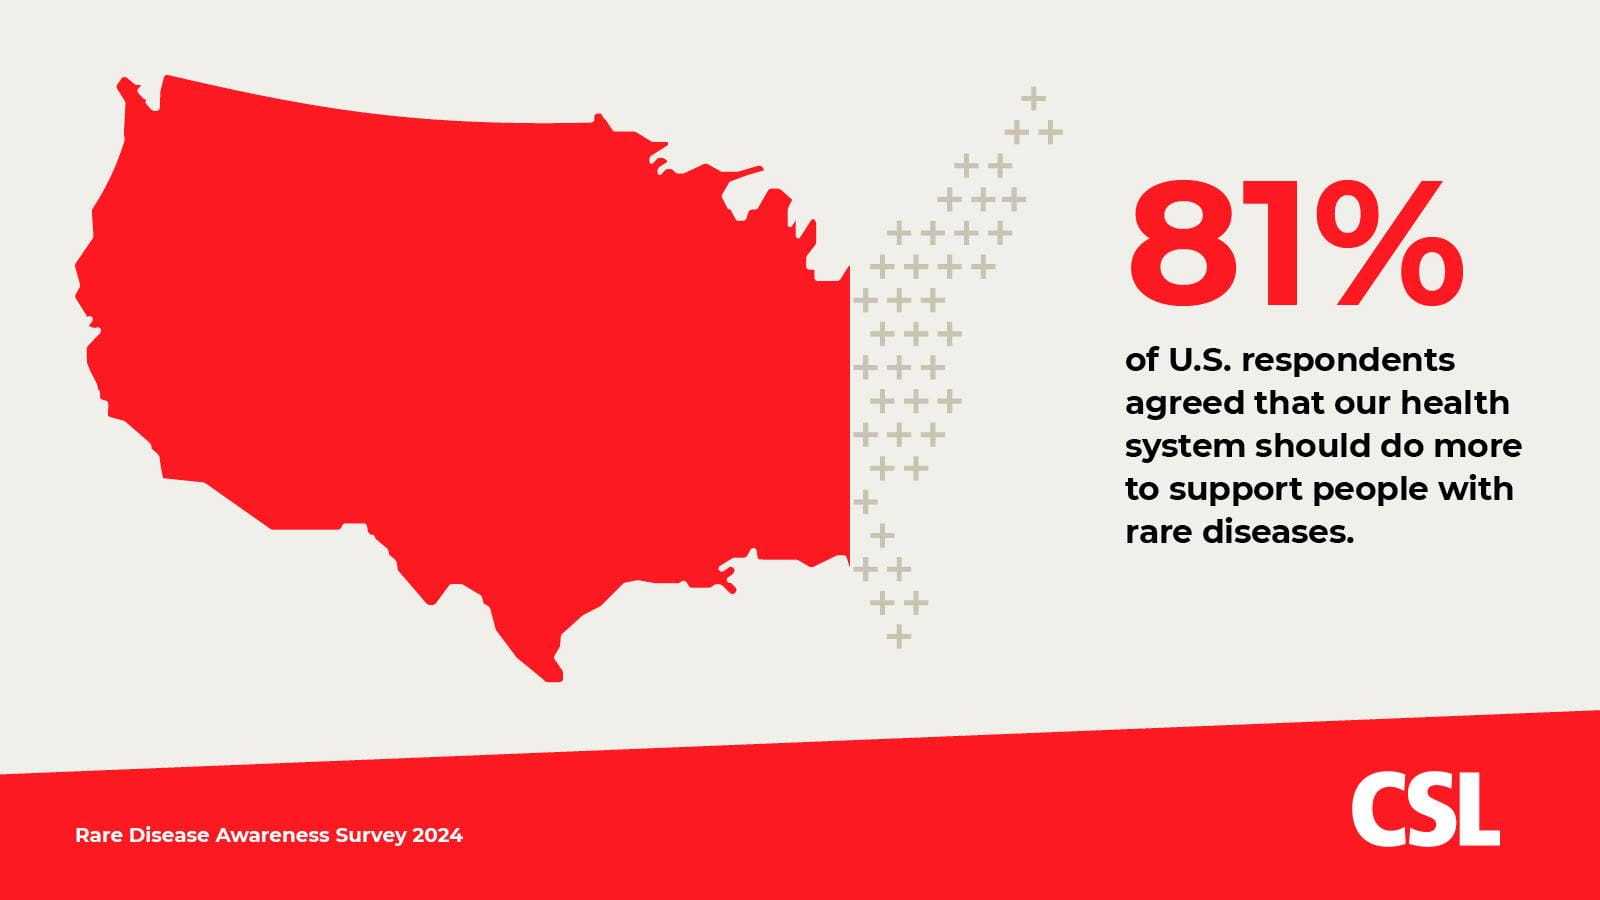 81% of U.S. respondents said the health care system should do more to support people who have rare diseases.